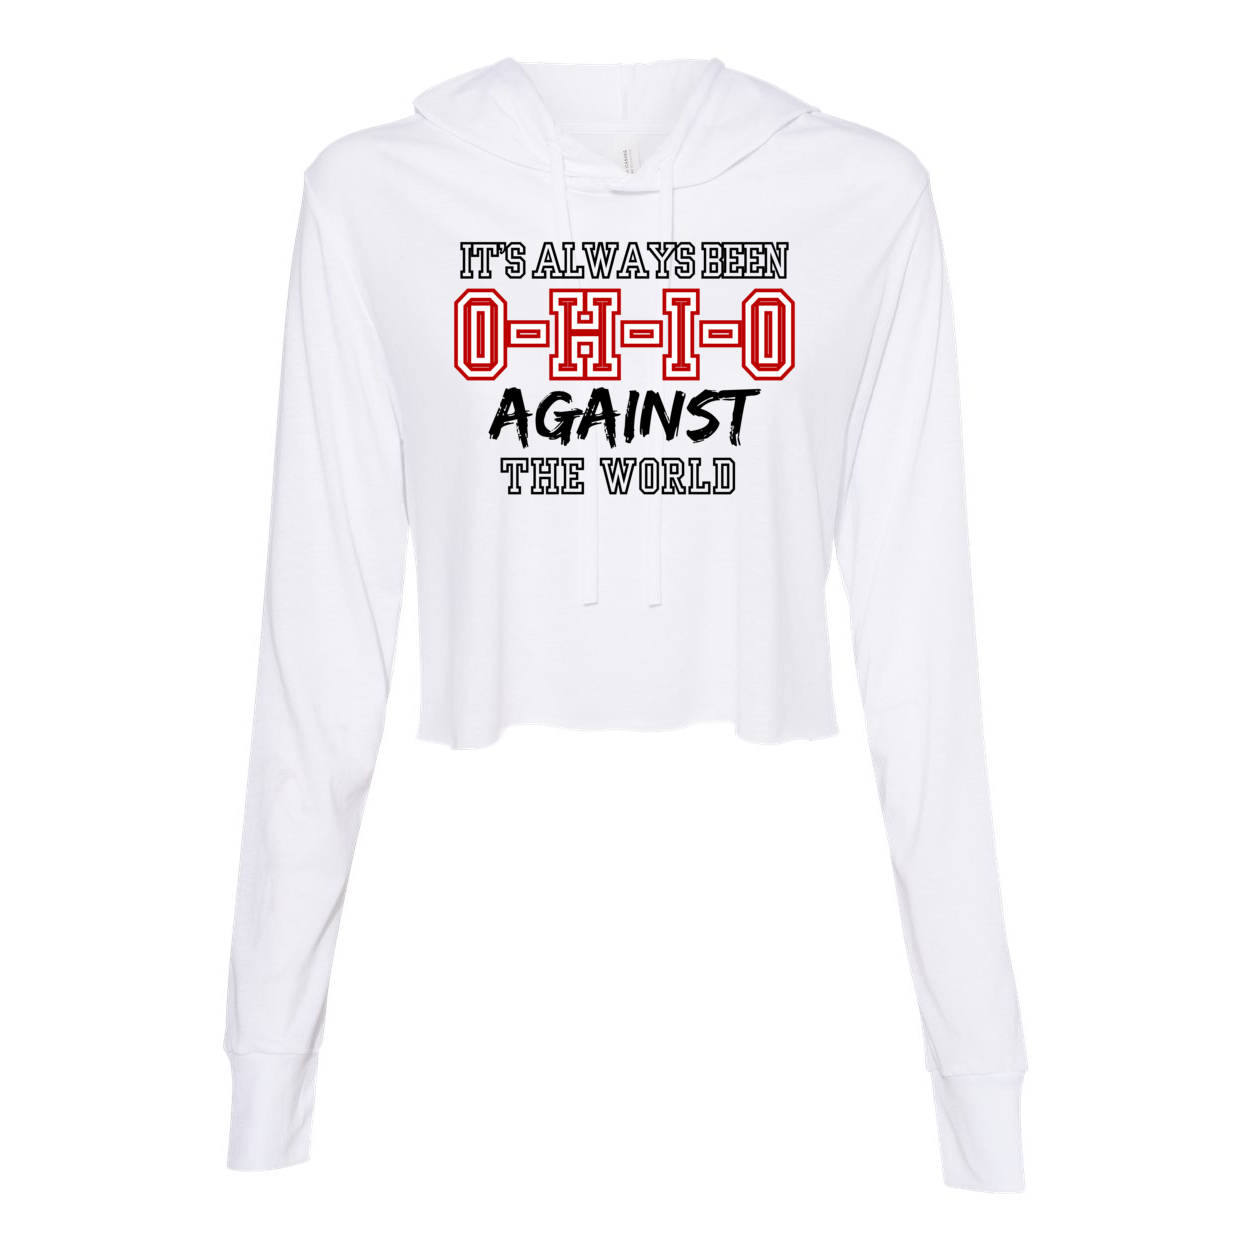 Women’s OH Against the World Graphic Super Soft Cropped Long Sleeve Hooded Tee